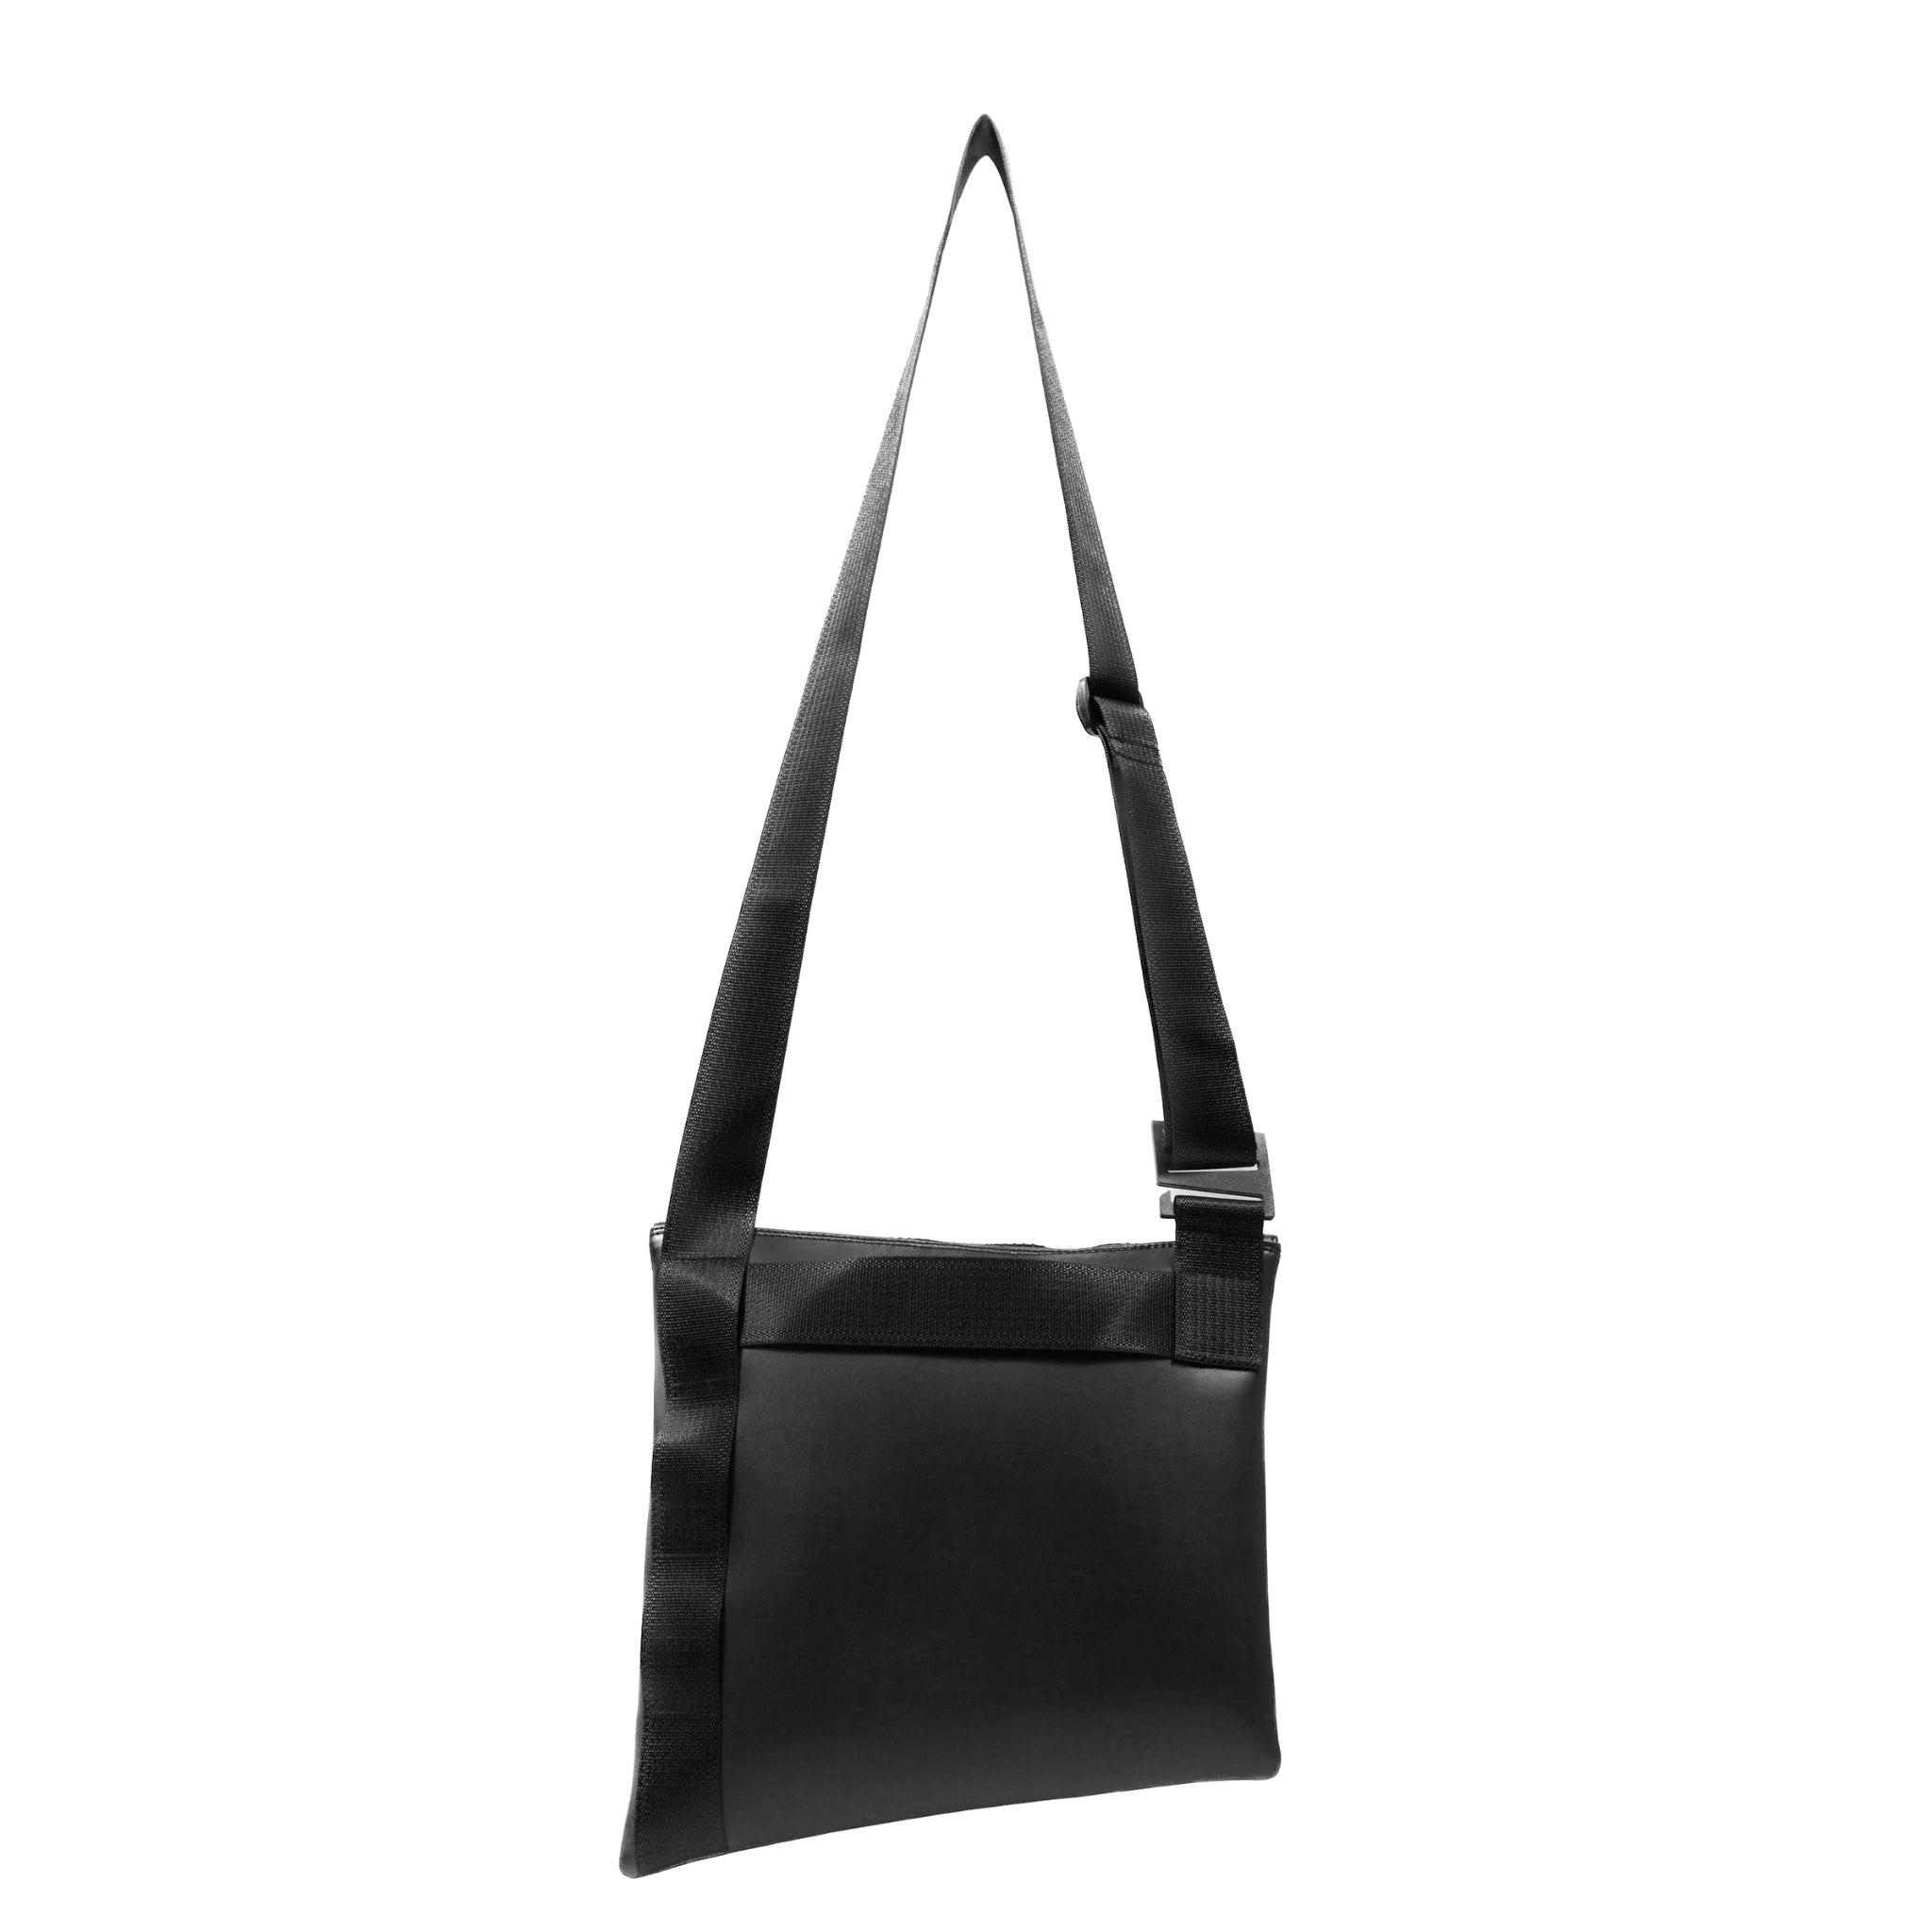 The back of The ANDO satchel in black vegan leather (desserto). Product shown at the front/center of a white background